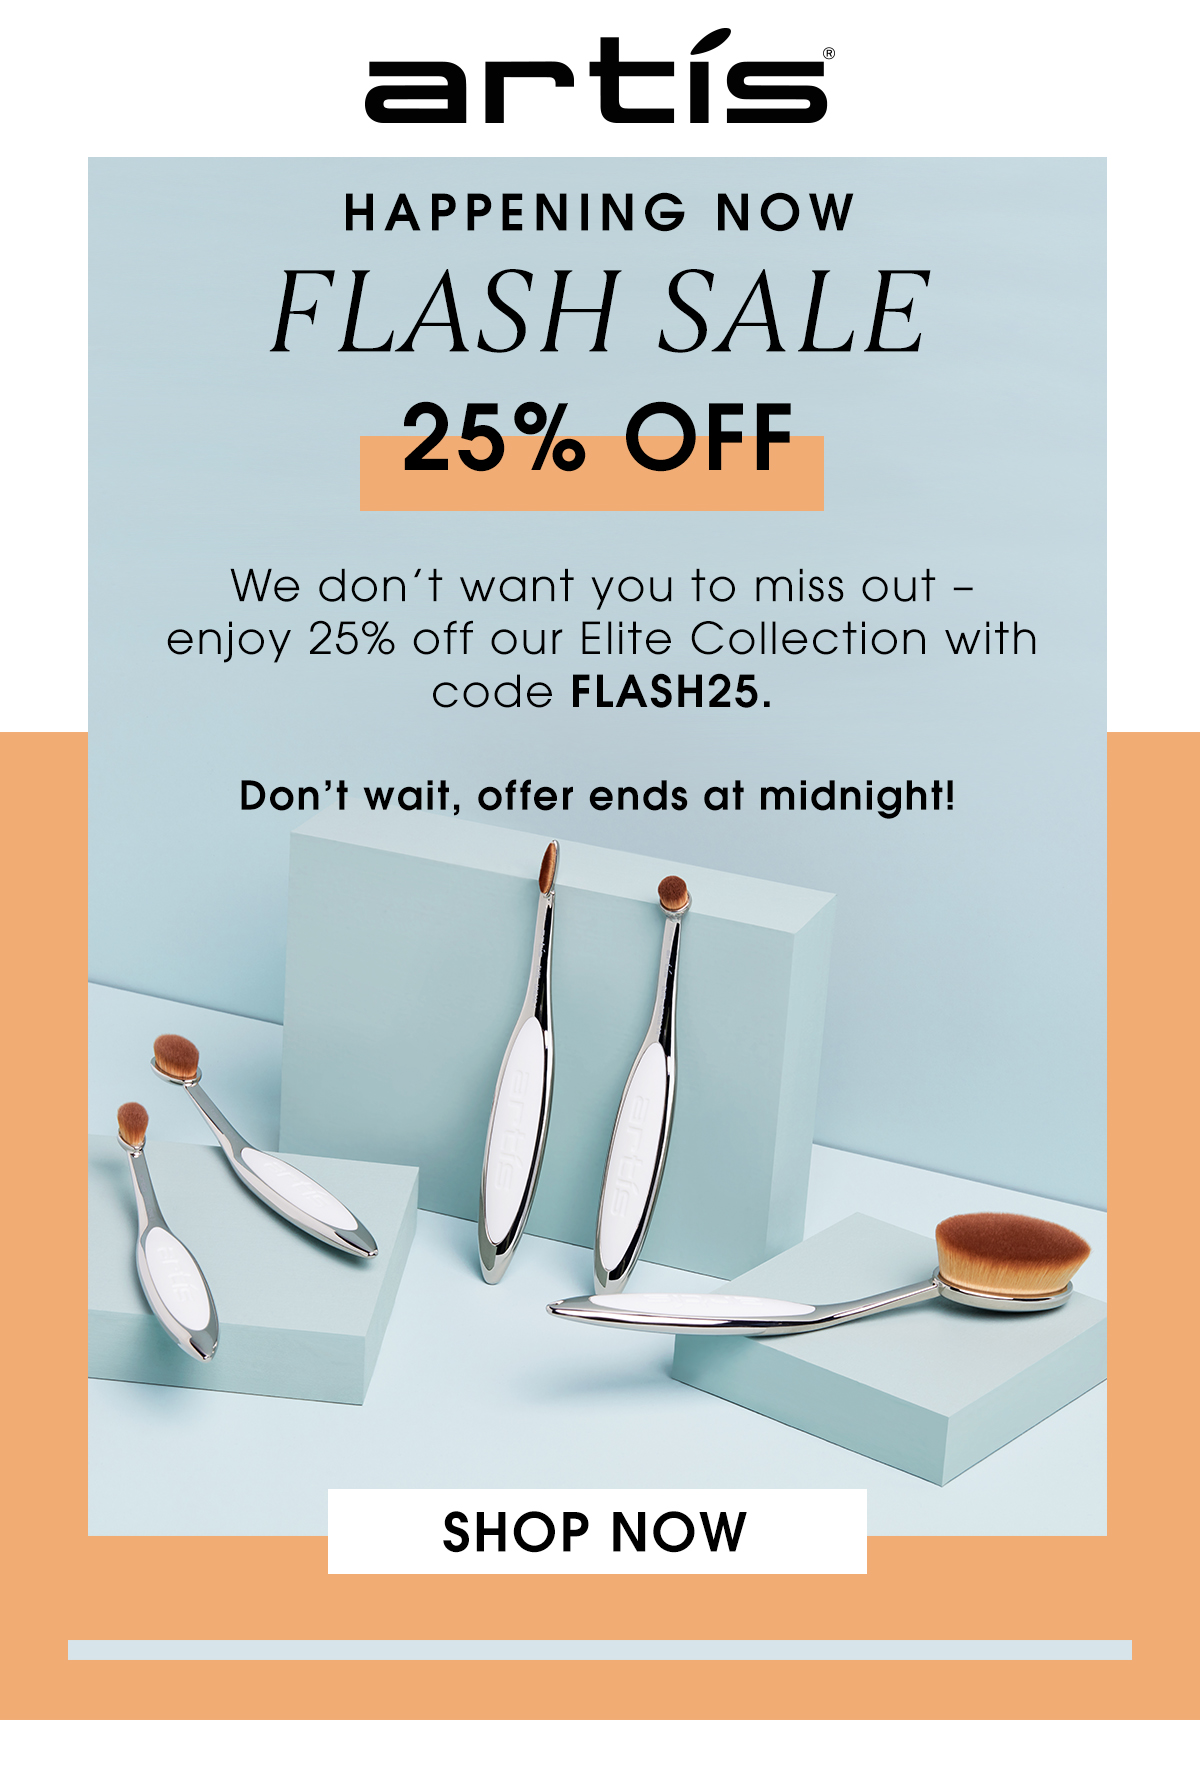 Flash sale, 25% off Elite Collection brushes with the code FLASH25